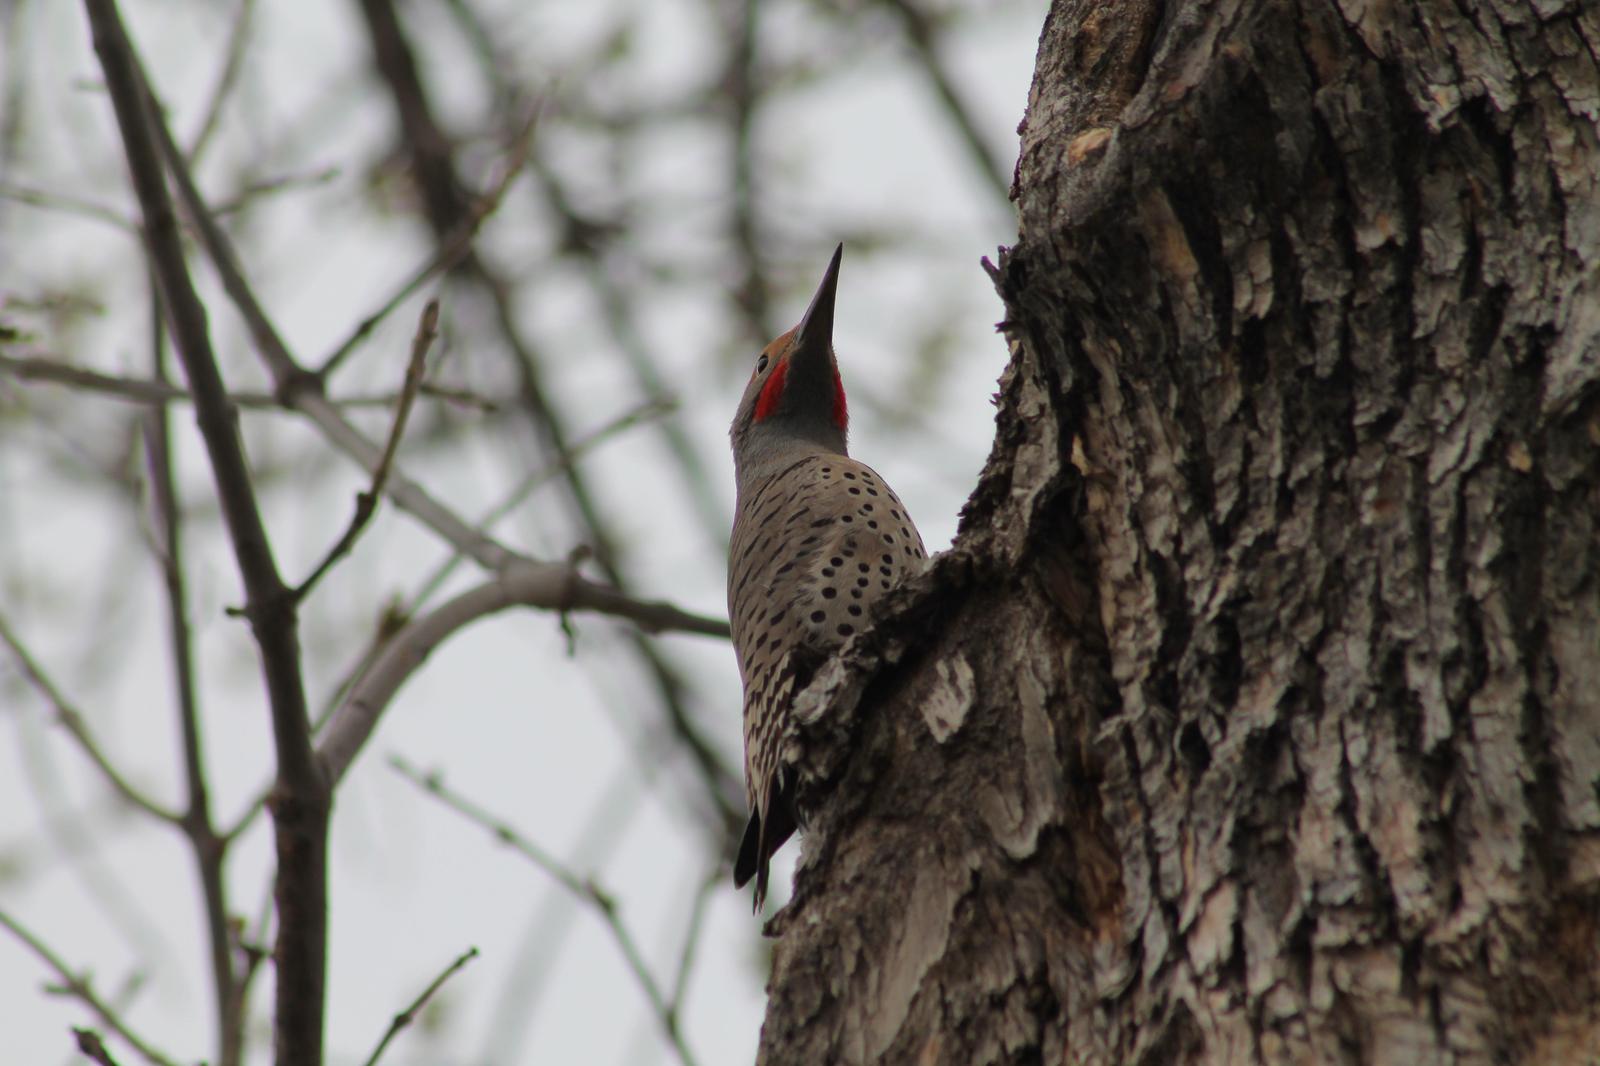 Northern Flicker (Red-shafted) Photo by Lorraine Lanning